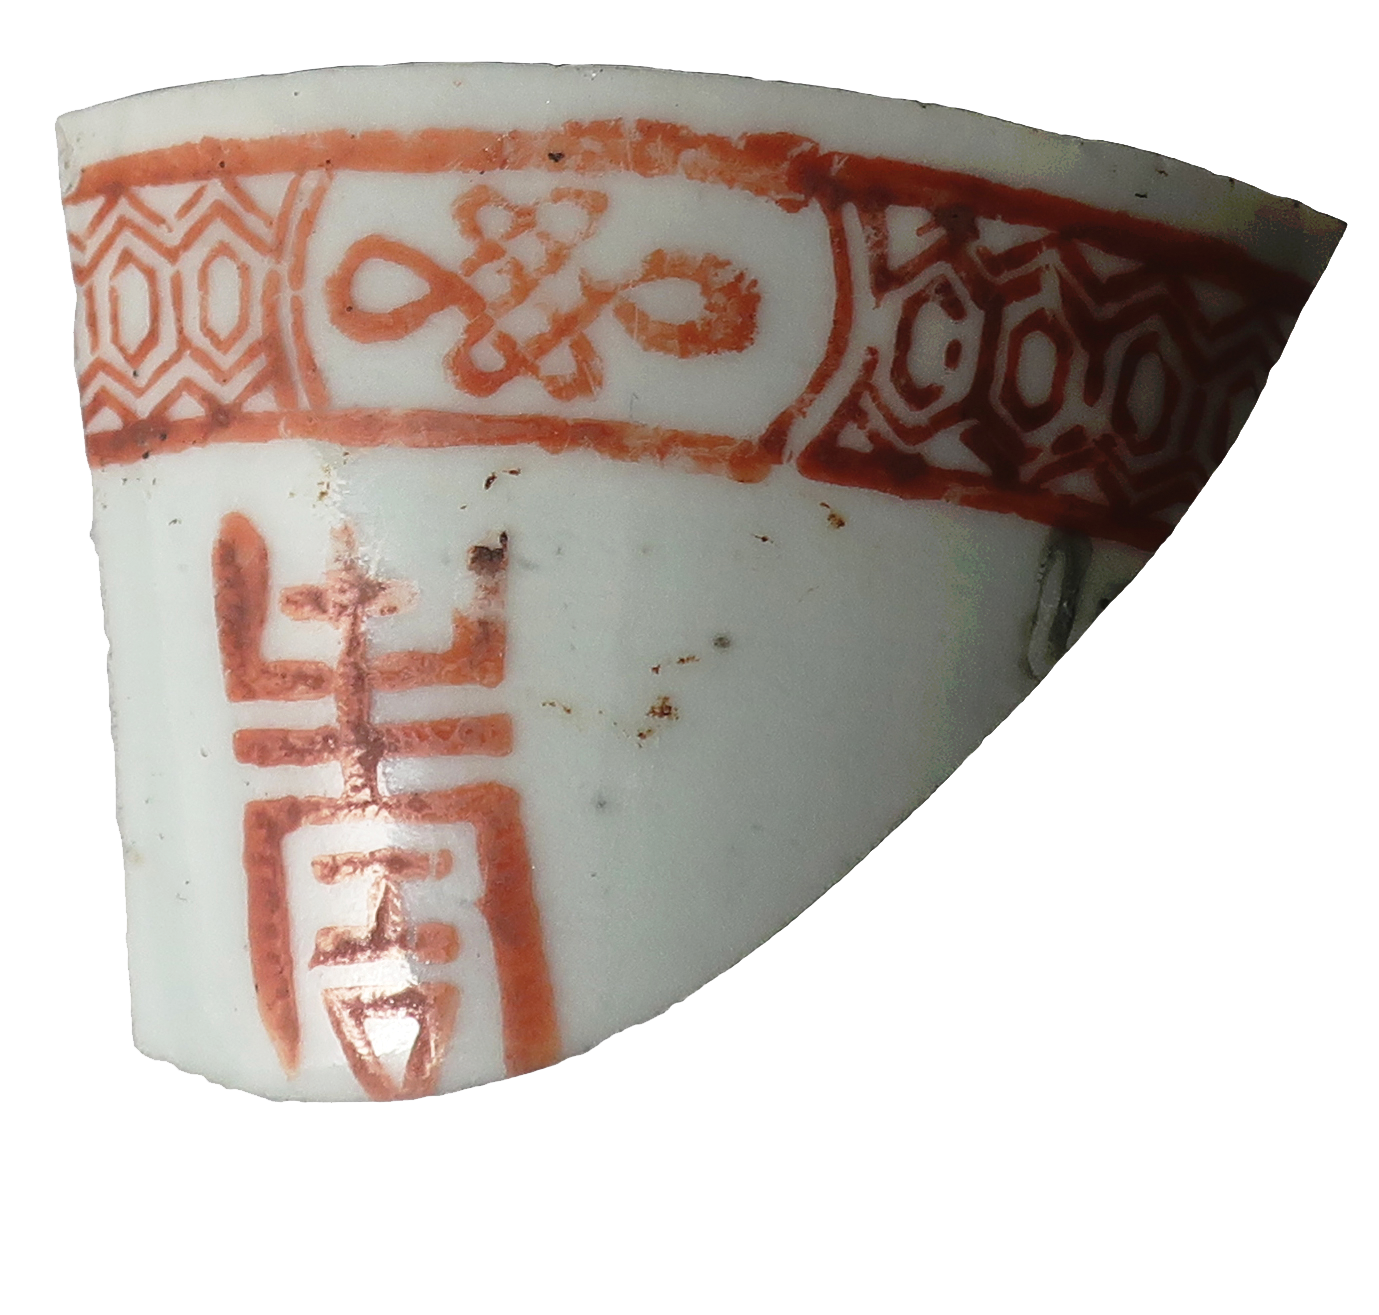 Fragment of tea cup with Chinese writing